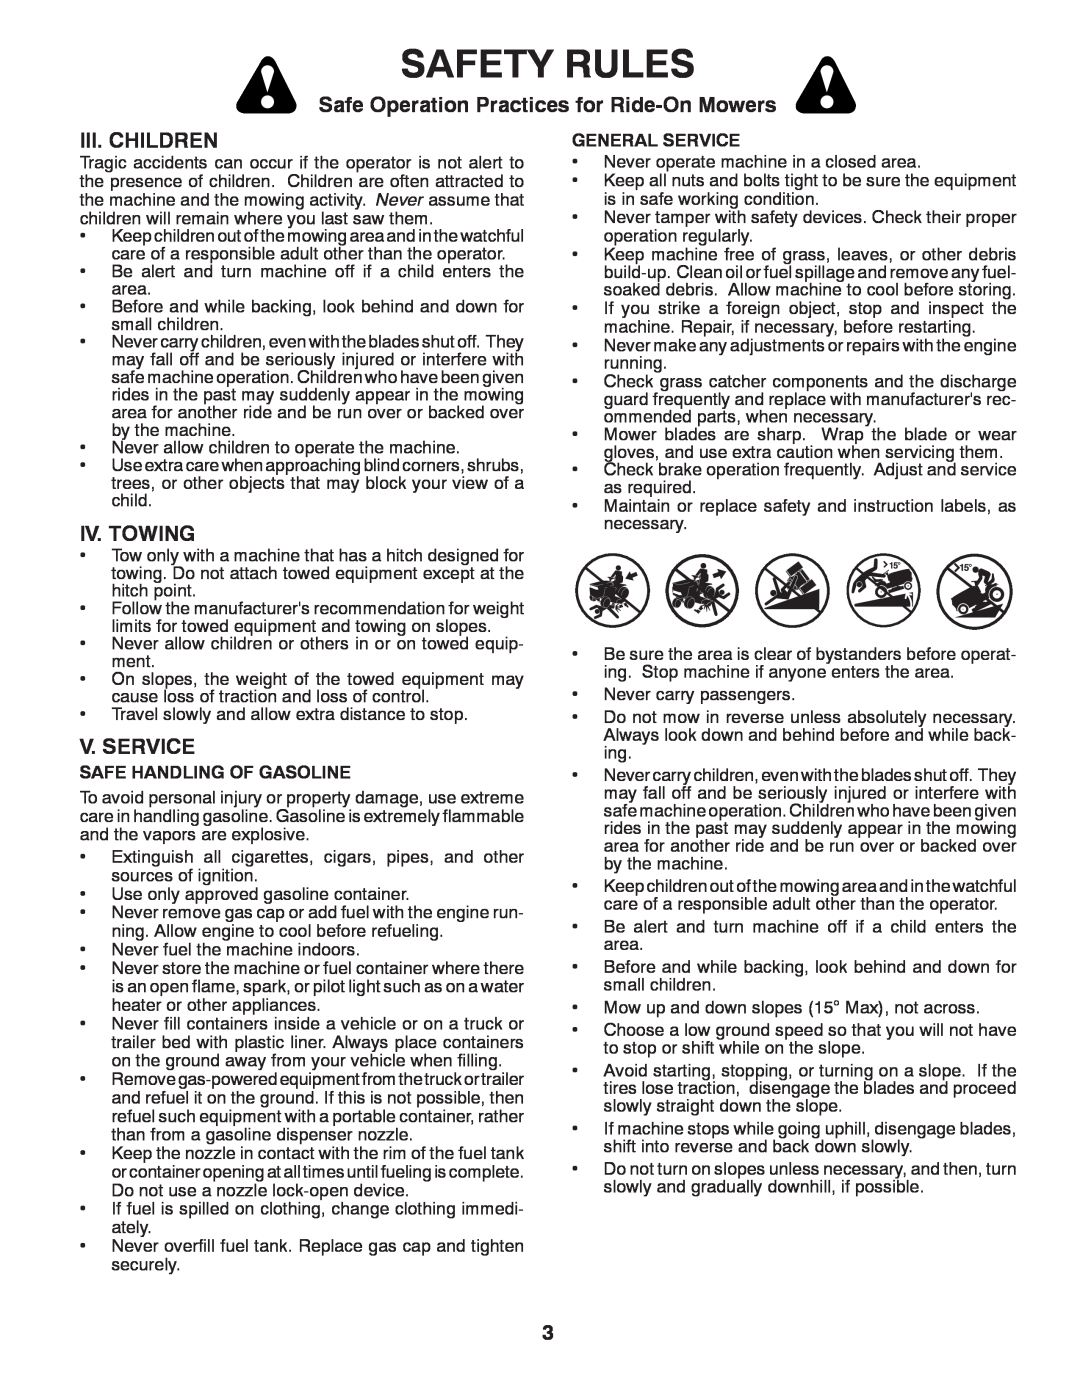 Poulan 425179 manual Iii. Children, Iv. Towing, V. Service, Safety Rules, Safe Operation Practices for Ride-On Mowers 